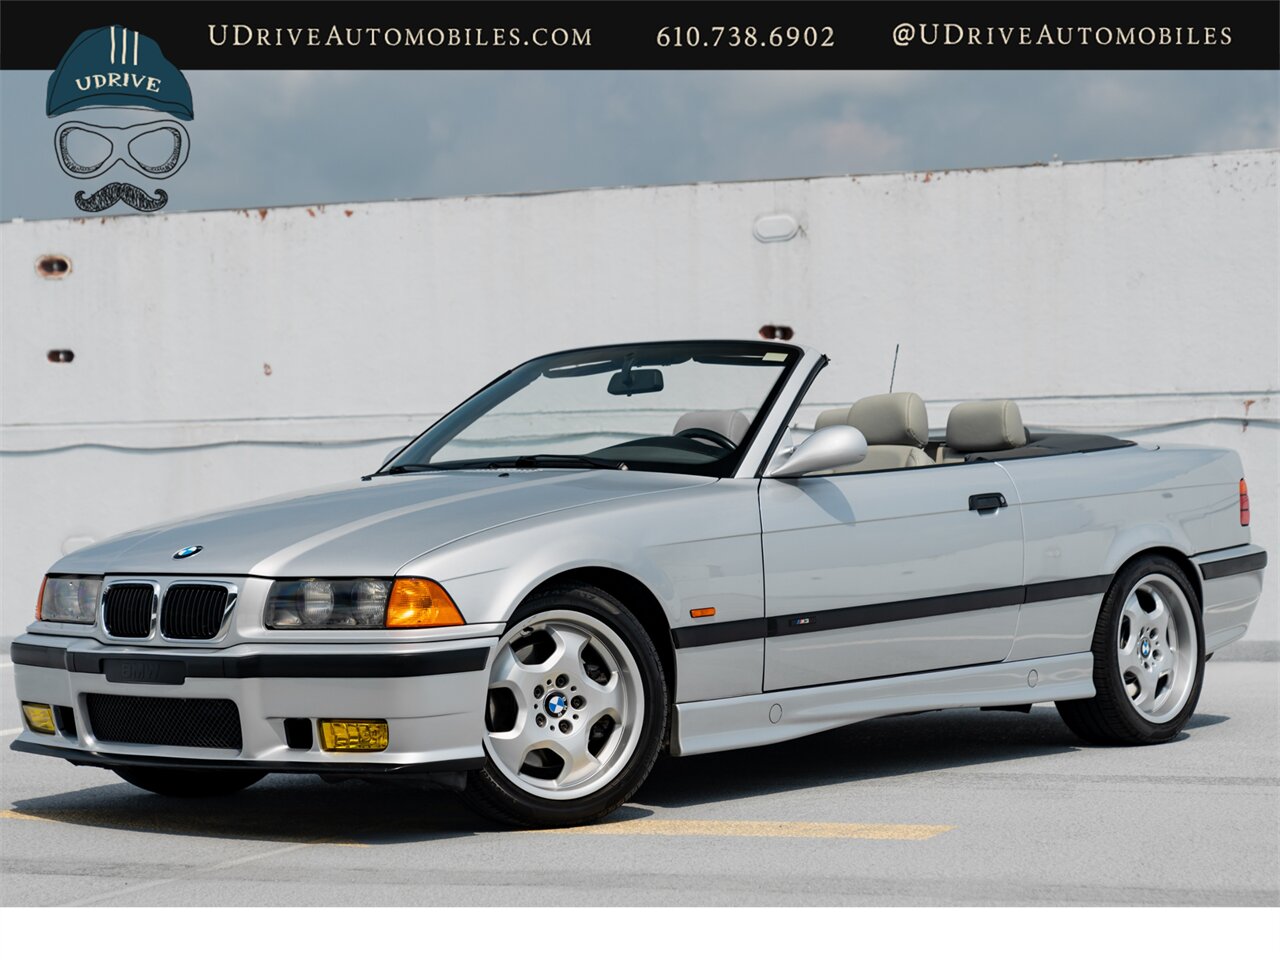 1998 BMW M3 Convertible  Automatic $7k Recent Service Low Miles - Photo 1 - West Chester, PA 19382